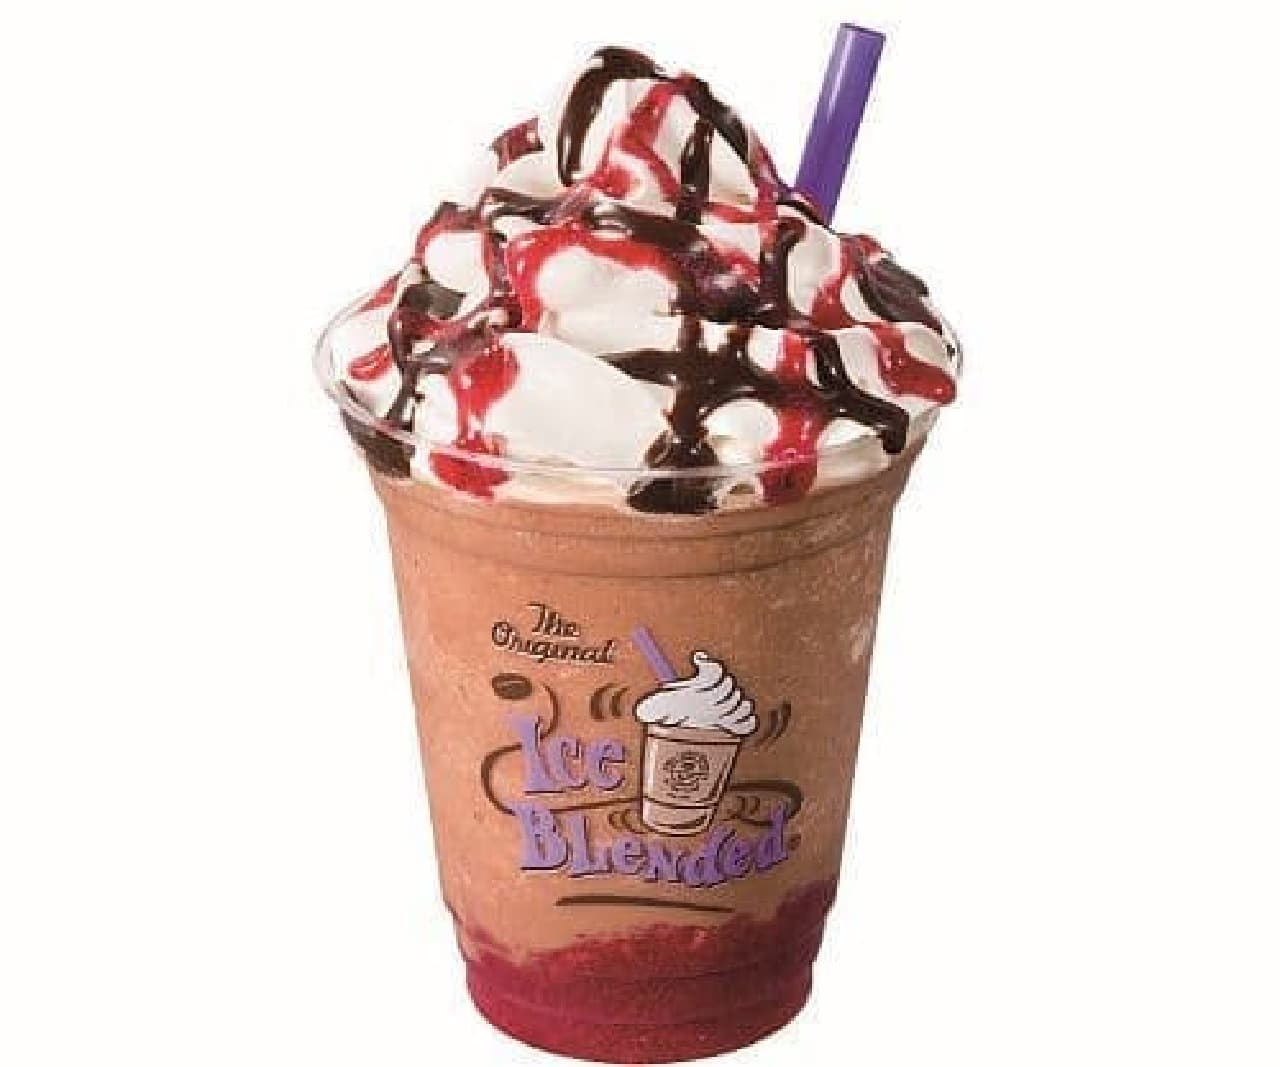 Coffee Bean & Tea Leaf "Chocolate Cranberry Ice Blended"